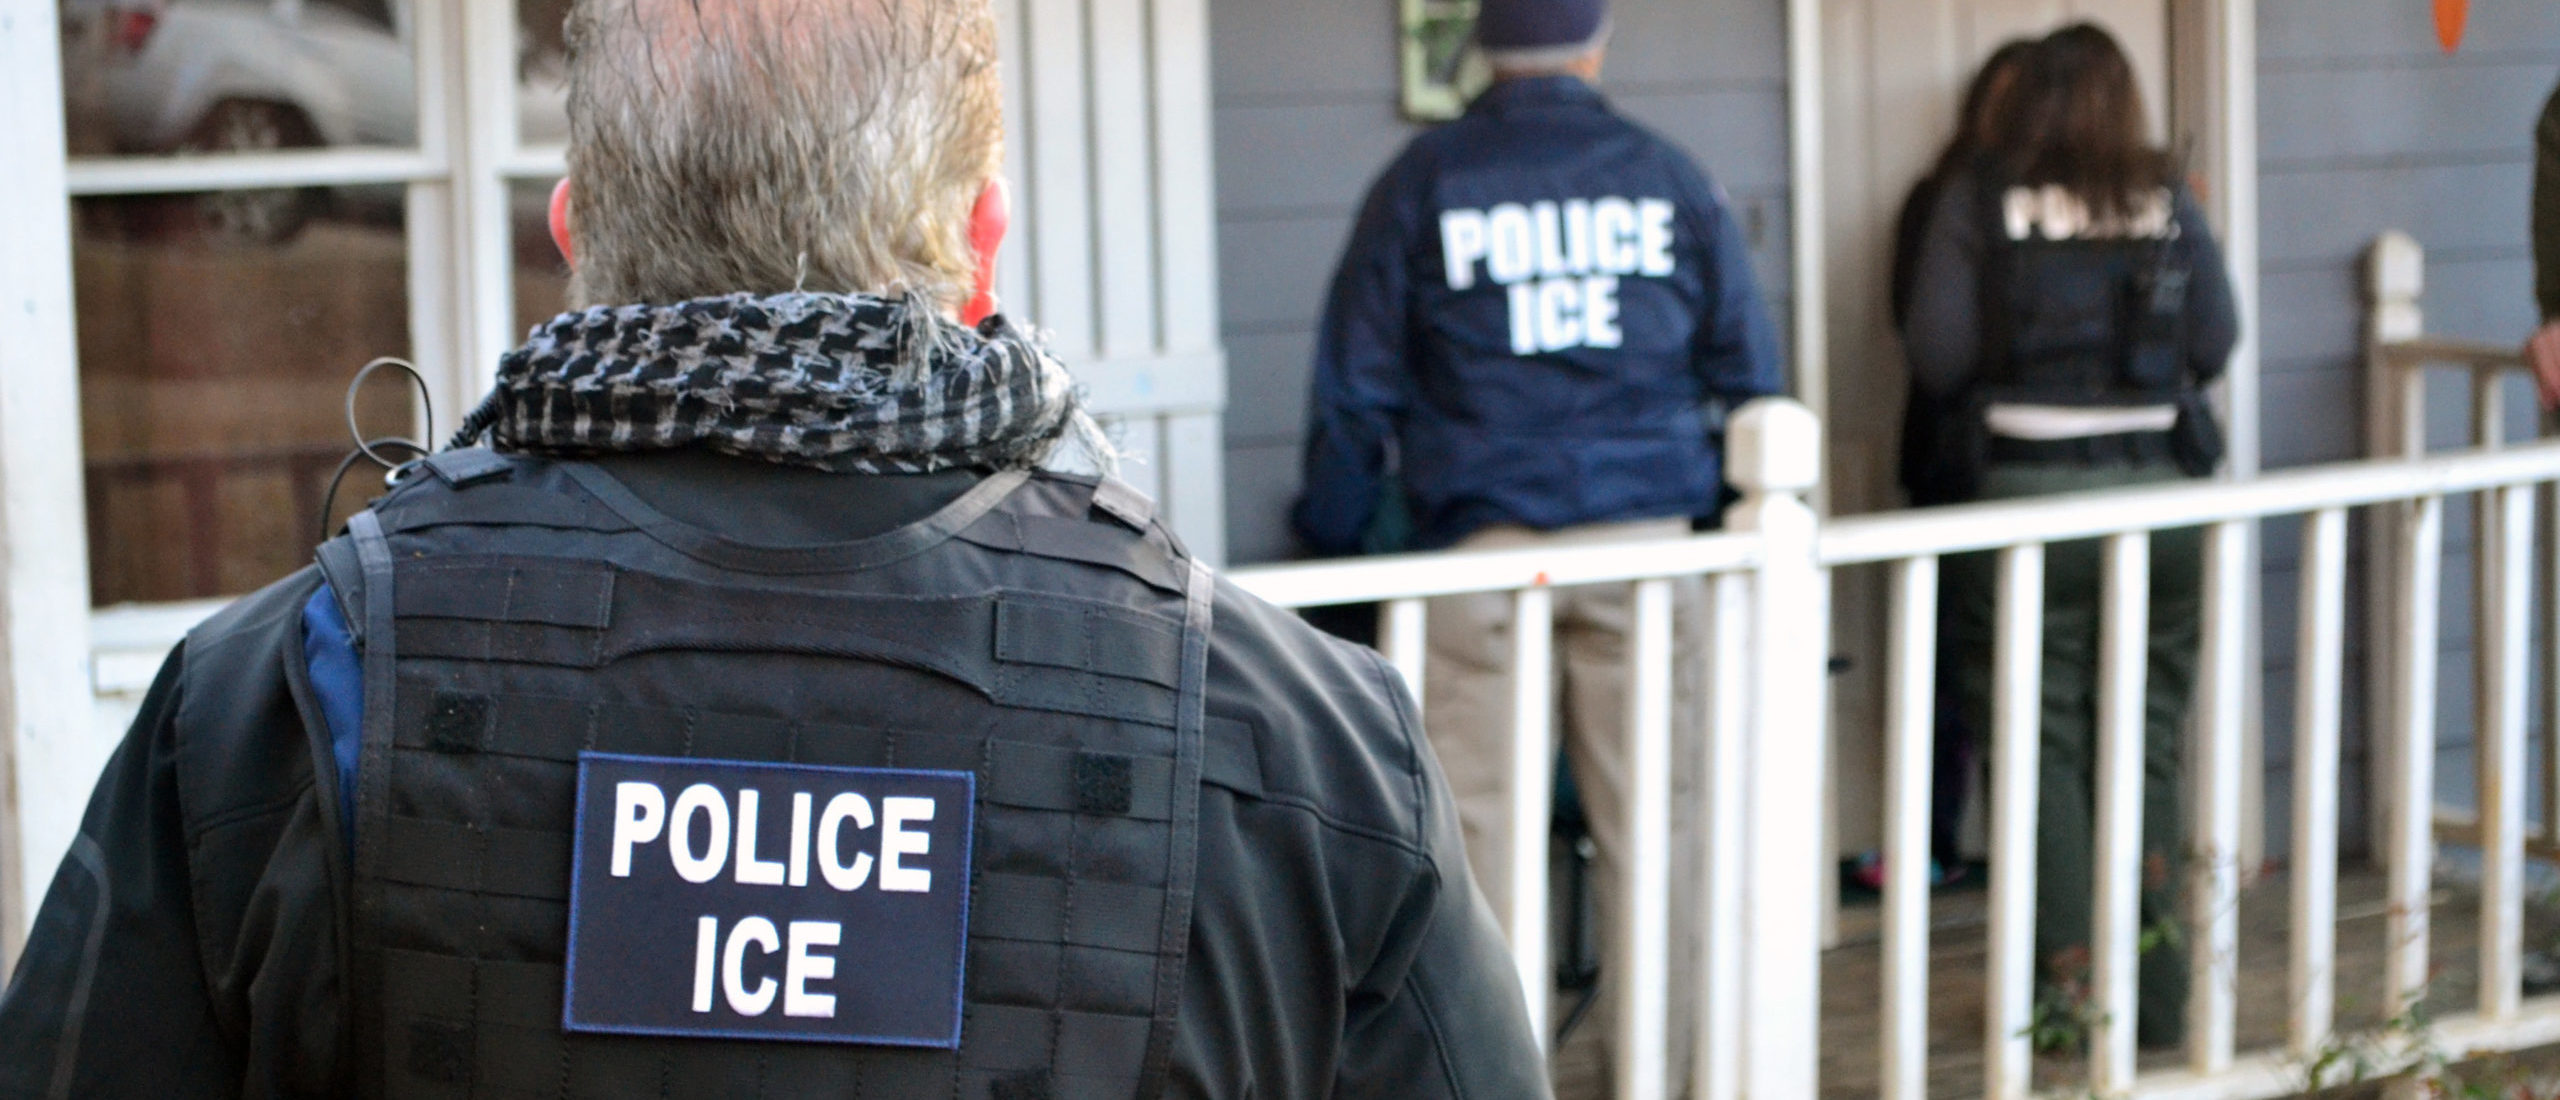 ATLANTA, GA - FEBRUARY 9: In this handout provided by U.S. Immigration and Customs Enforcement, Foreign nationals were arrested this week during a targeted enforcement operation conducted by U.S. Immigration and Customs Enforcement (ICE) aimed at immigration fugitives, re-entrants and at-large criminal aliens February 9, 2017 in Atlanta, Georgia. (Photo by Bryan Cox/U.S. Immigration and Customs Enforcement via Getty Images)